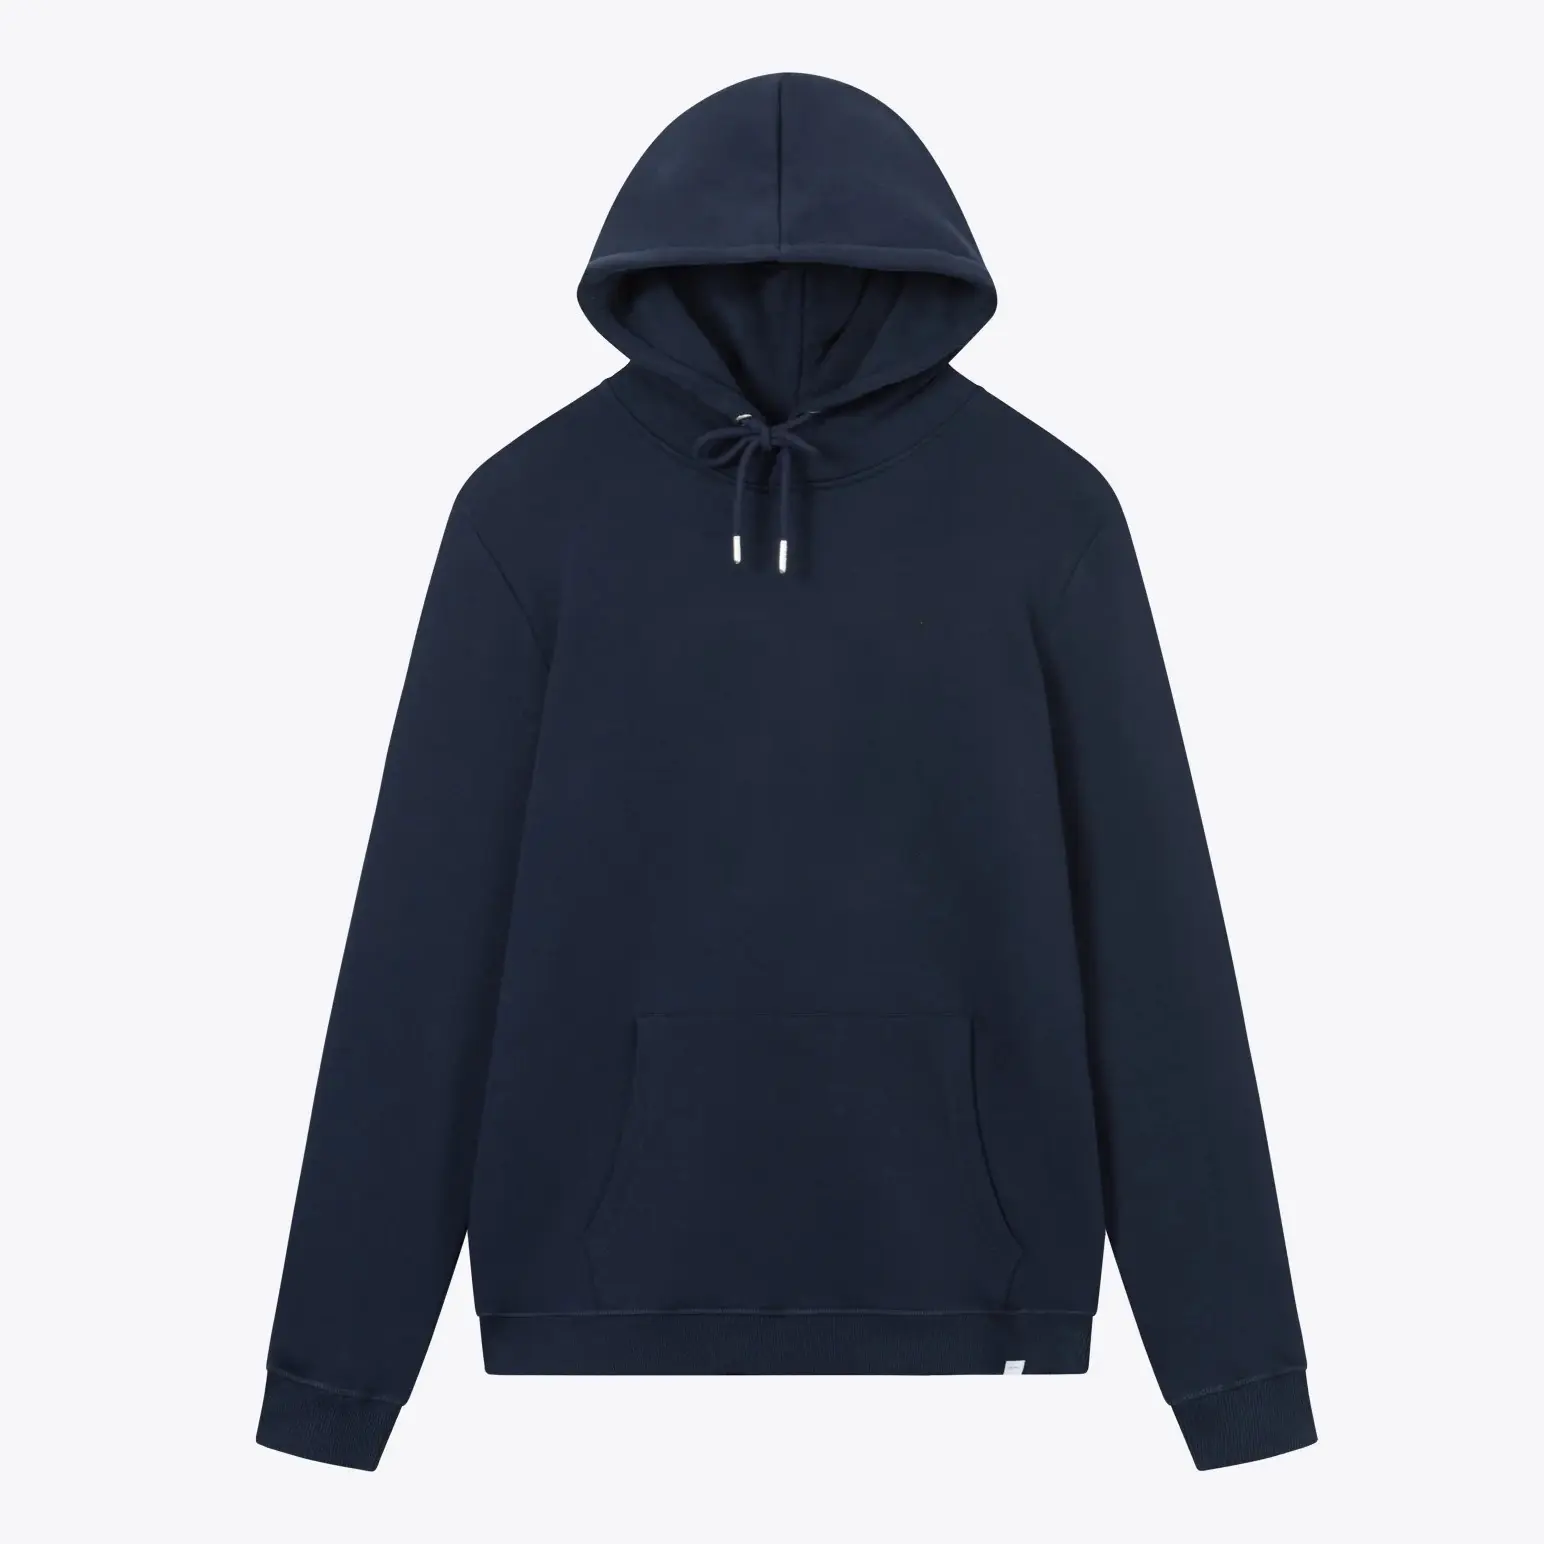 Full Customization Hoodie Men's Sweatshirt 100% Cotton Fabric Pullover Solid Breathable No MOQ Customized Logo Supplier